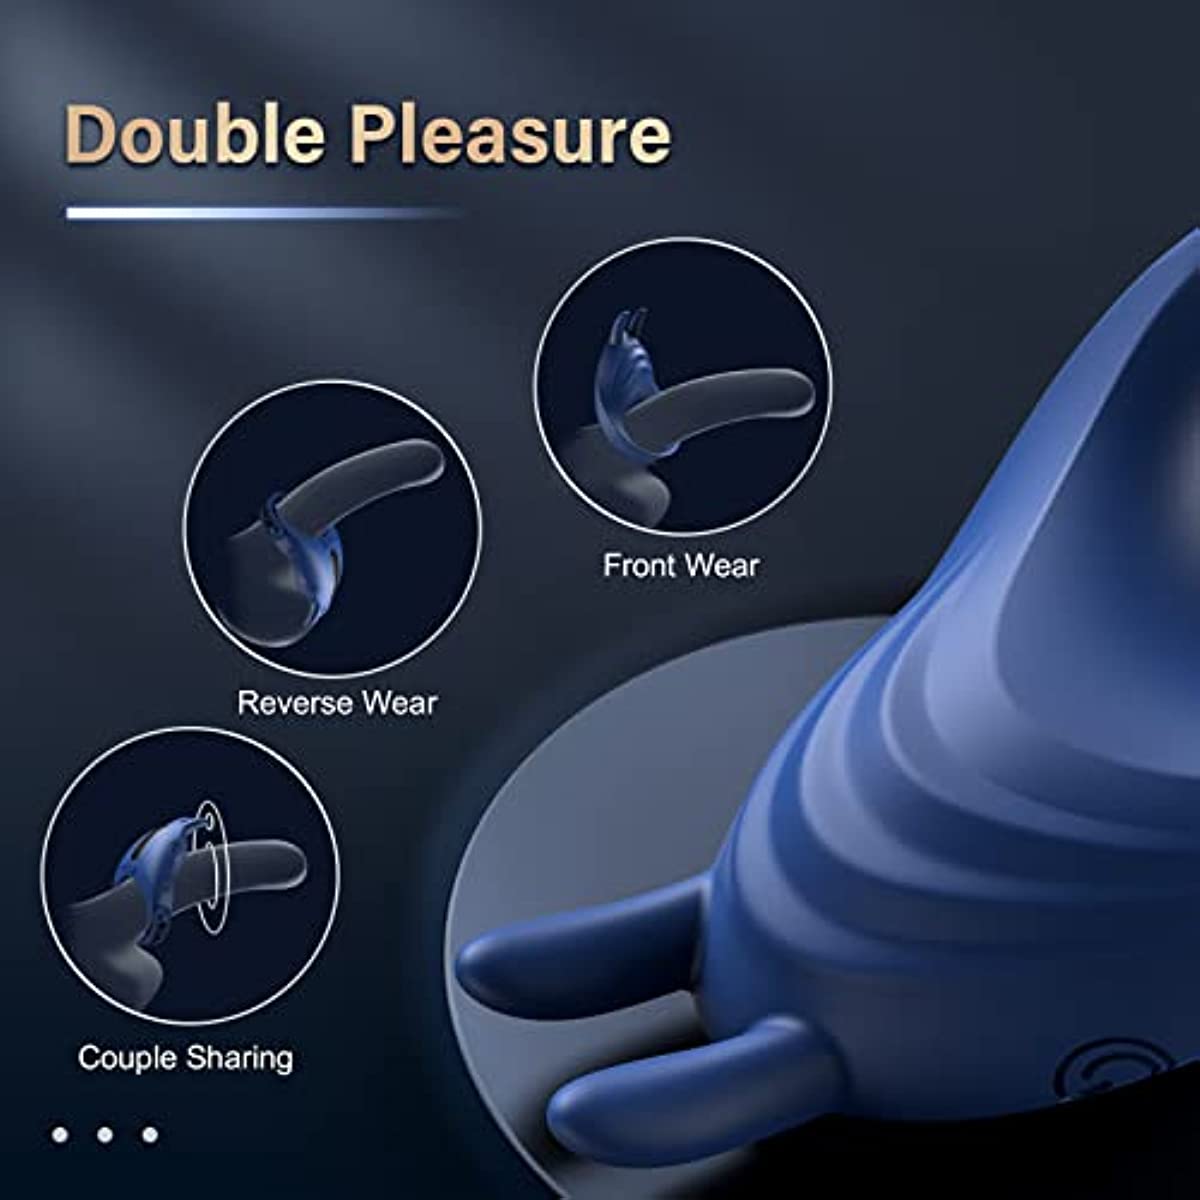 ARCHIE | Adjustable Silicone Vibration Cock Ring